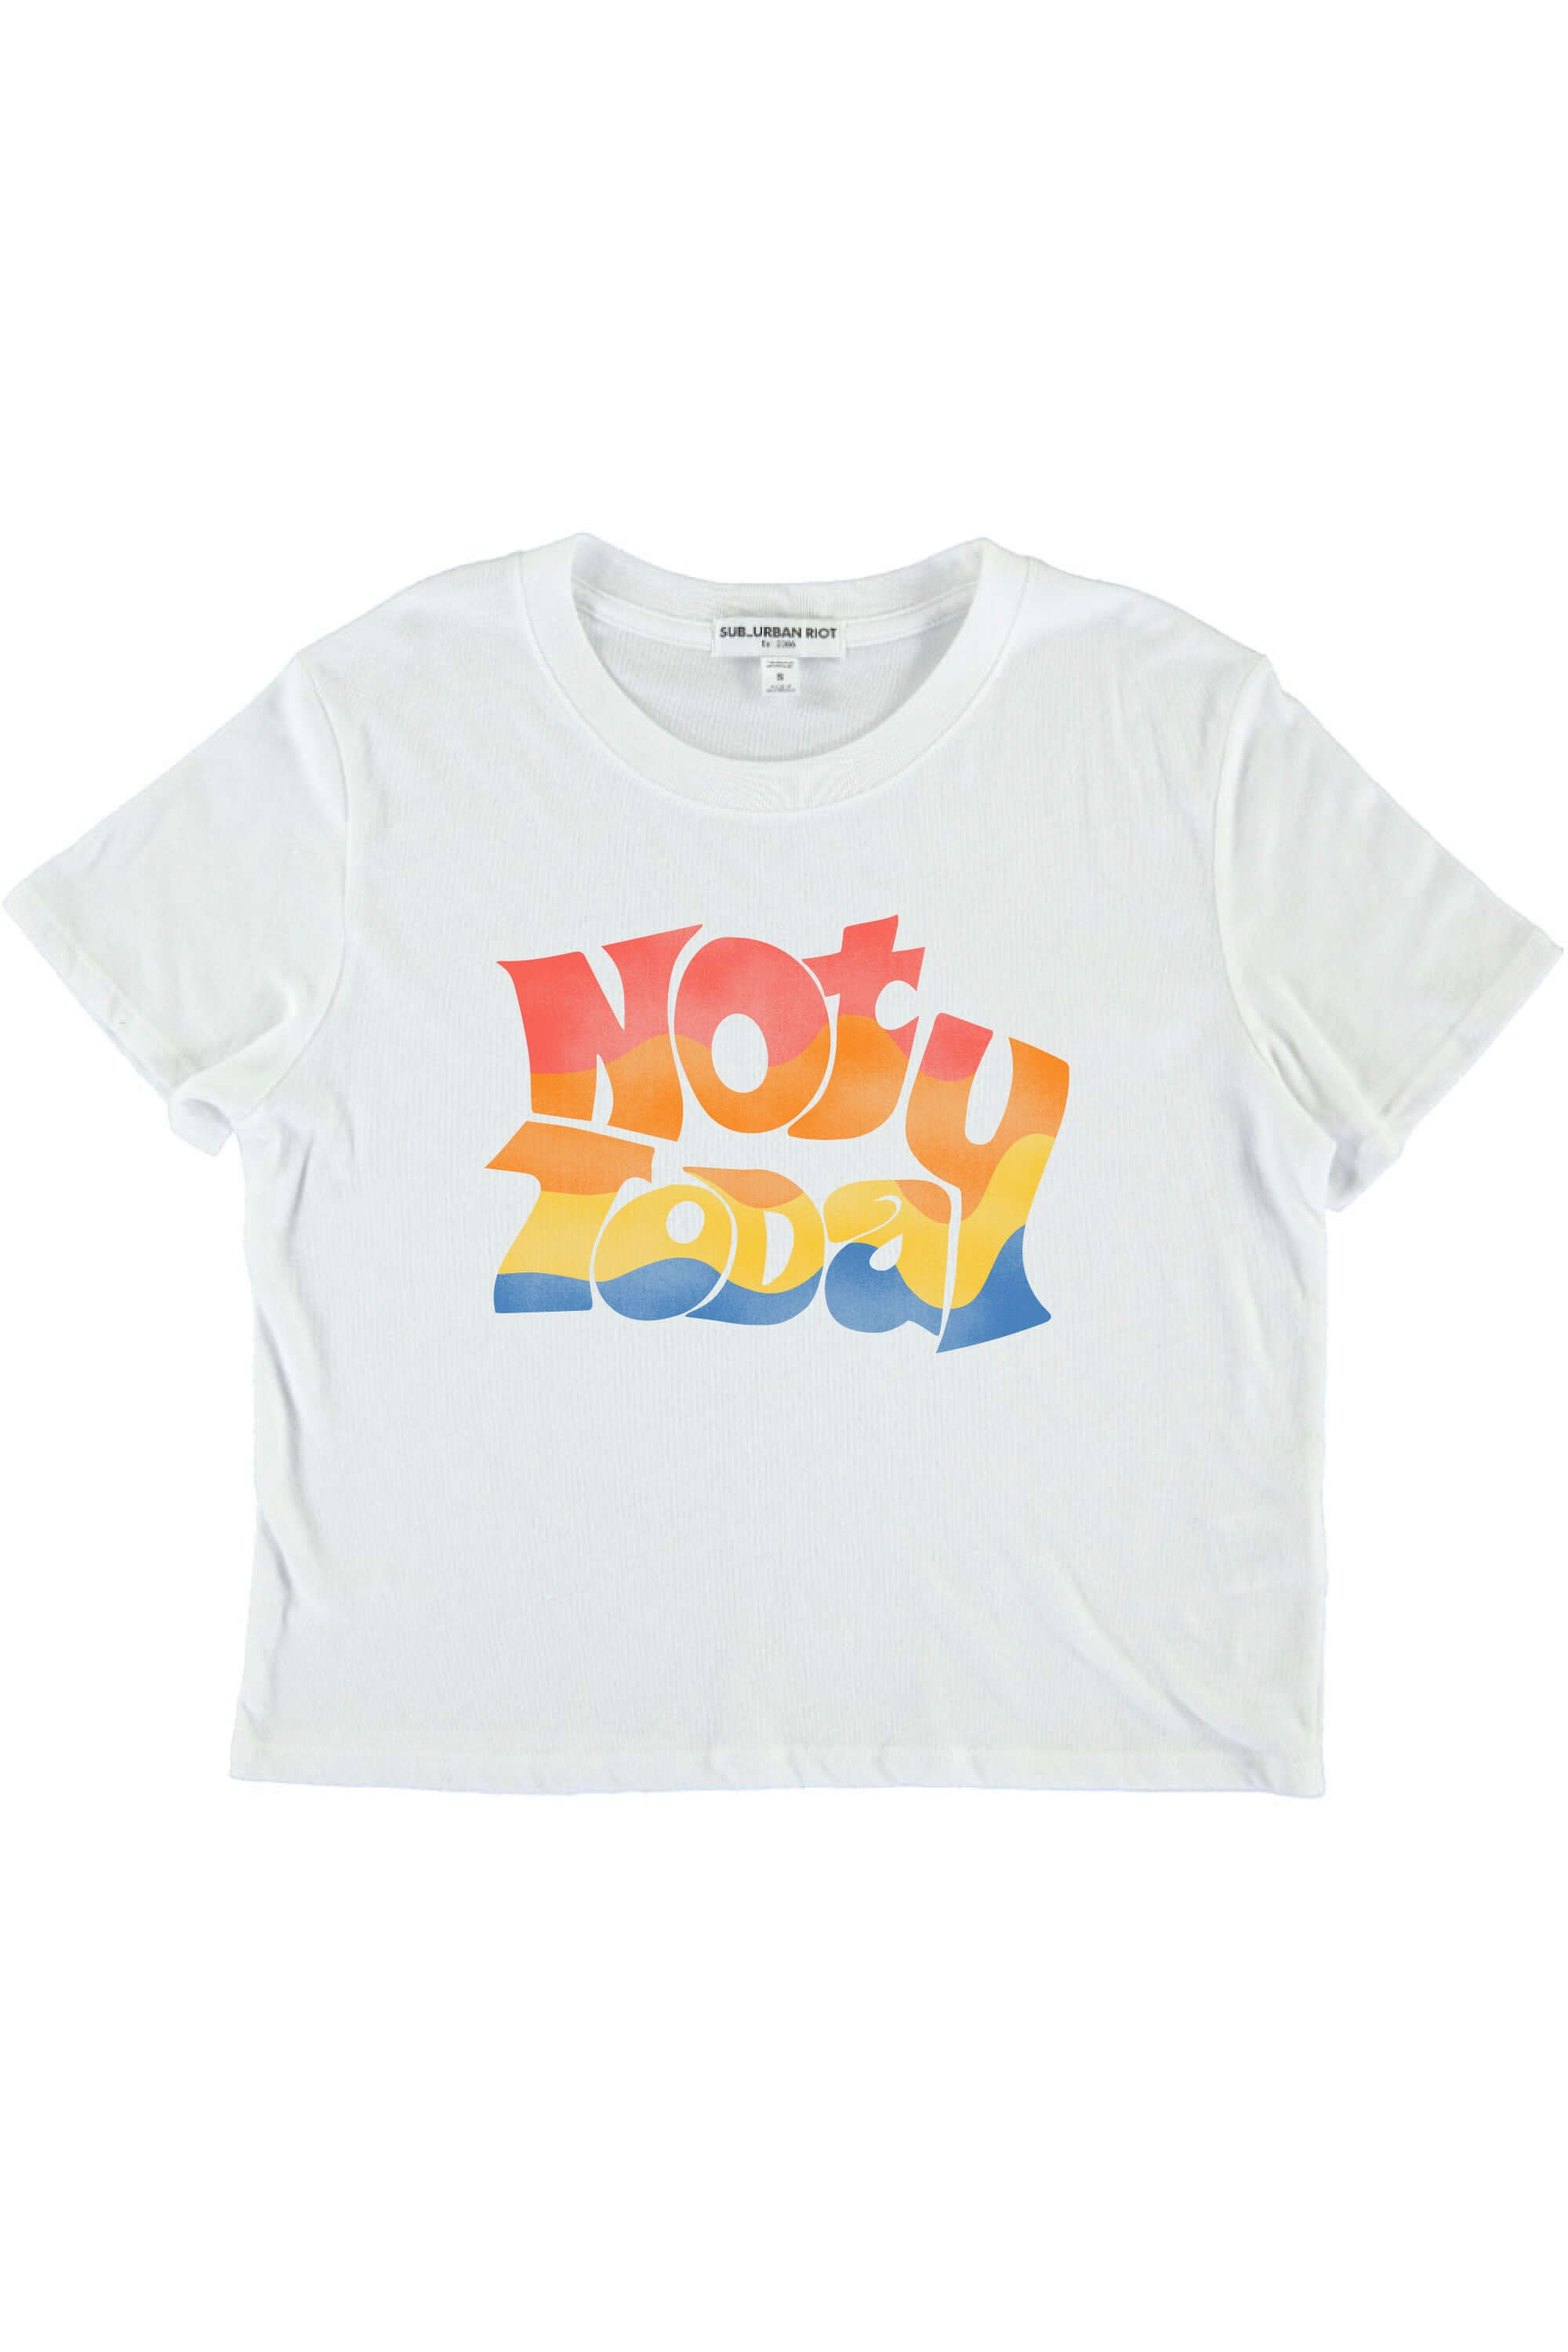 NOT TODAY RAINBOW YOUTH SIZE CROP TEE